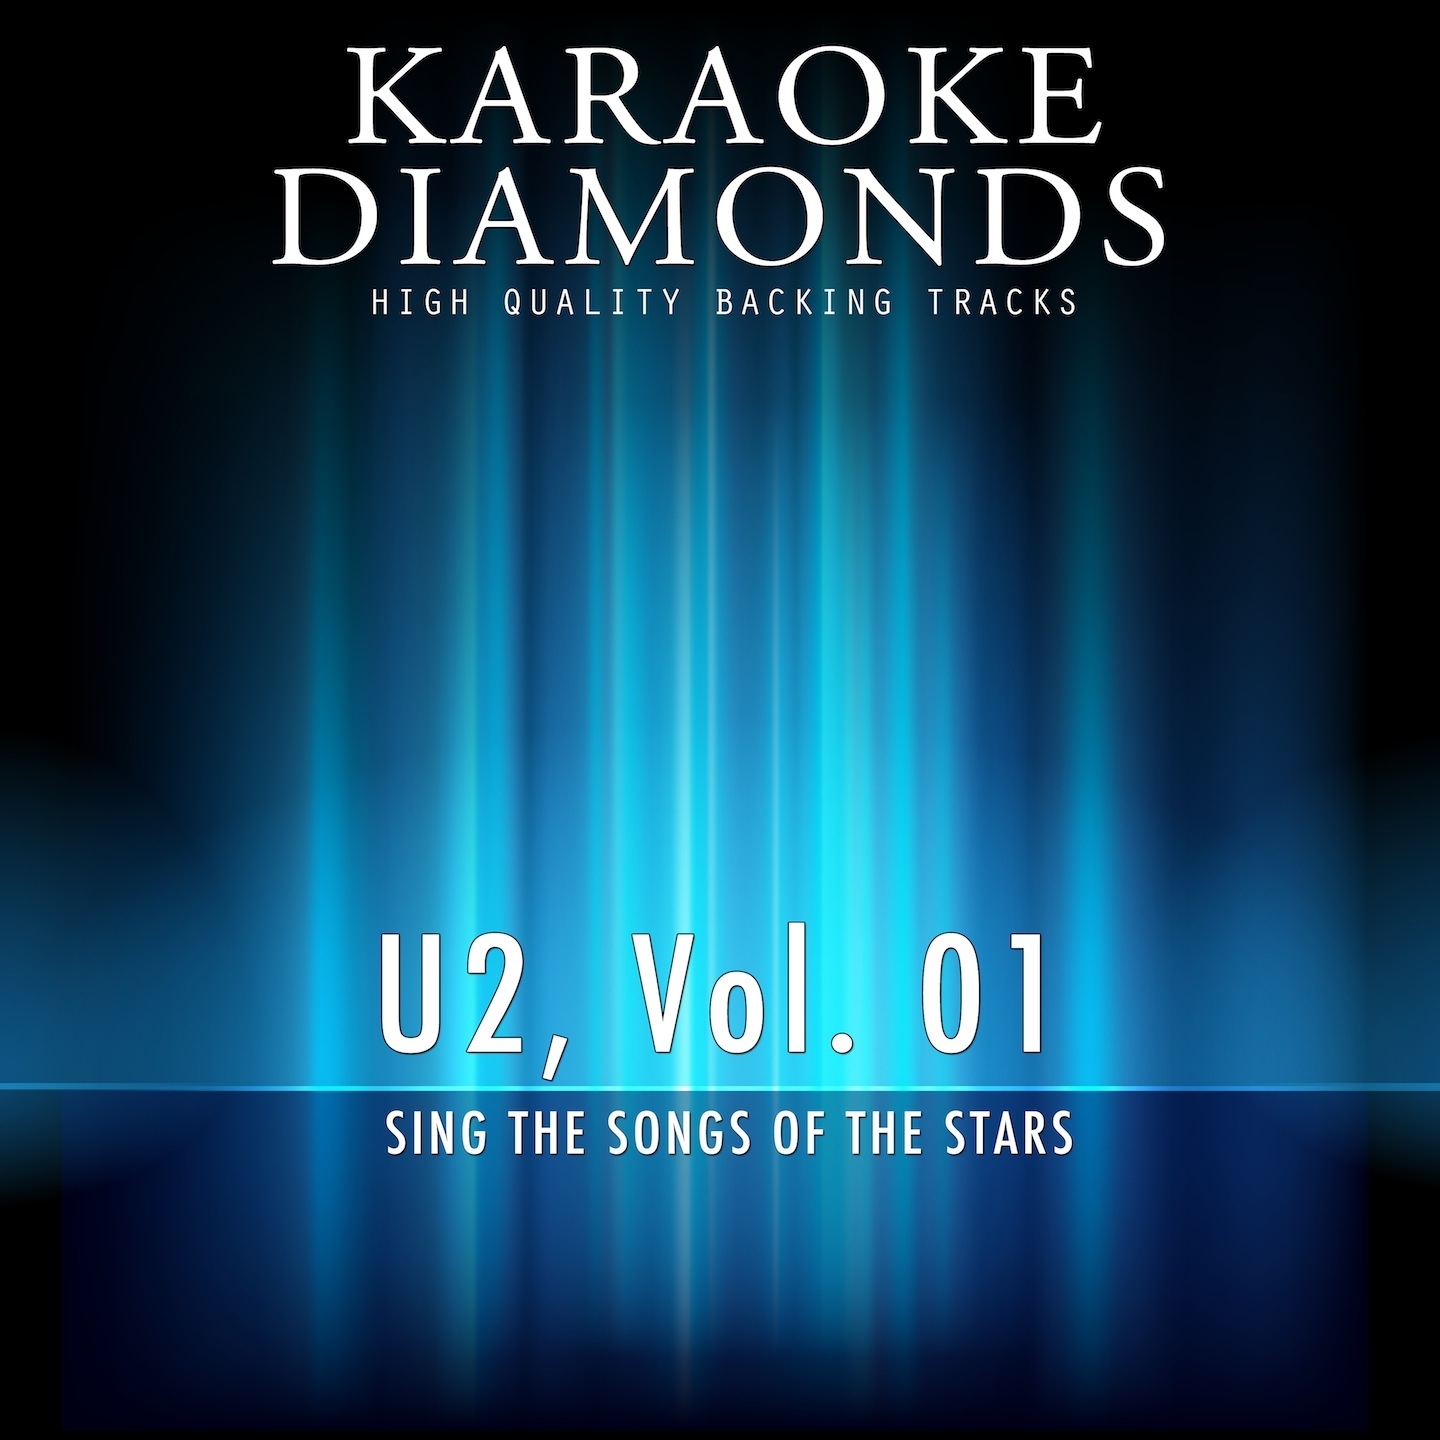 Discotheque (Karaoke Version In the Style of U2)